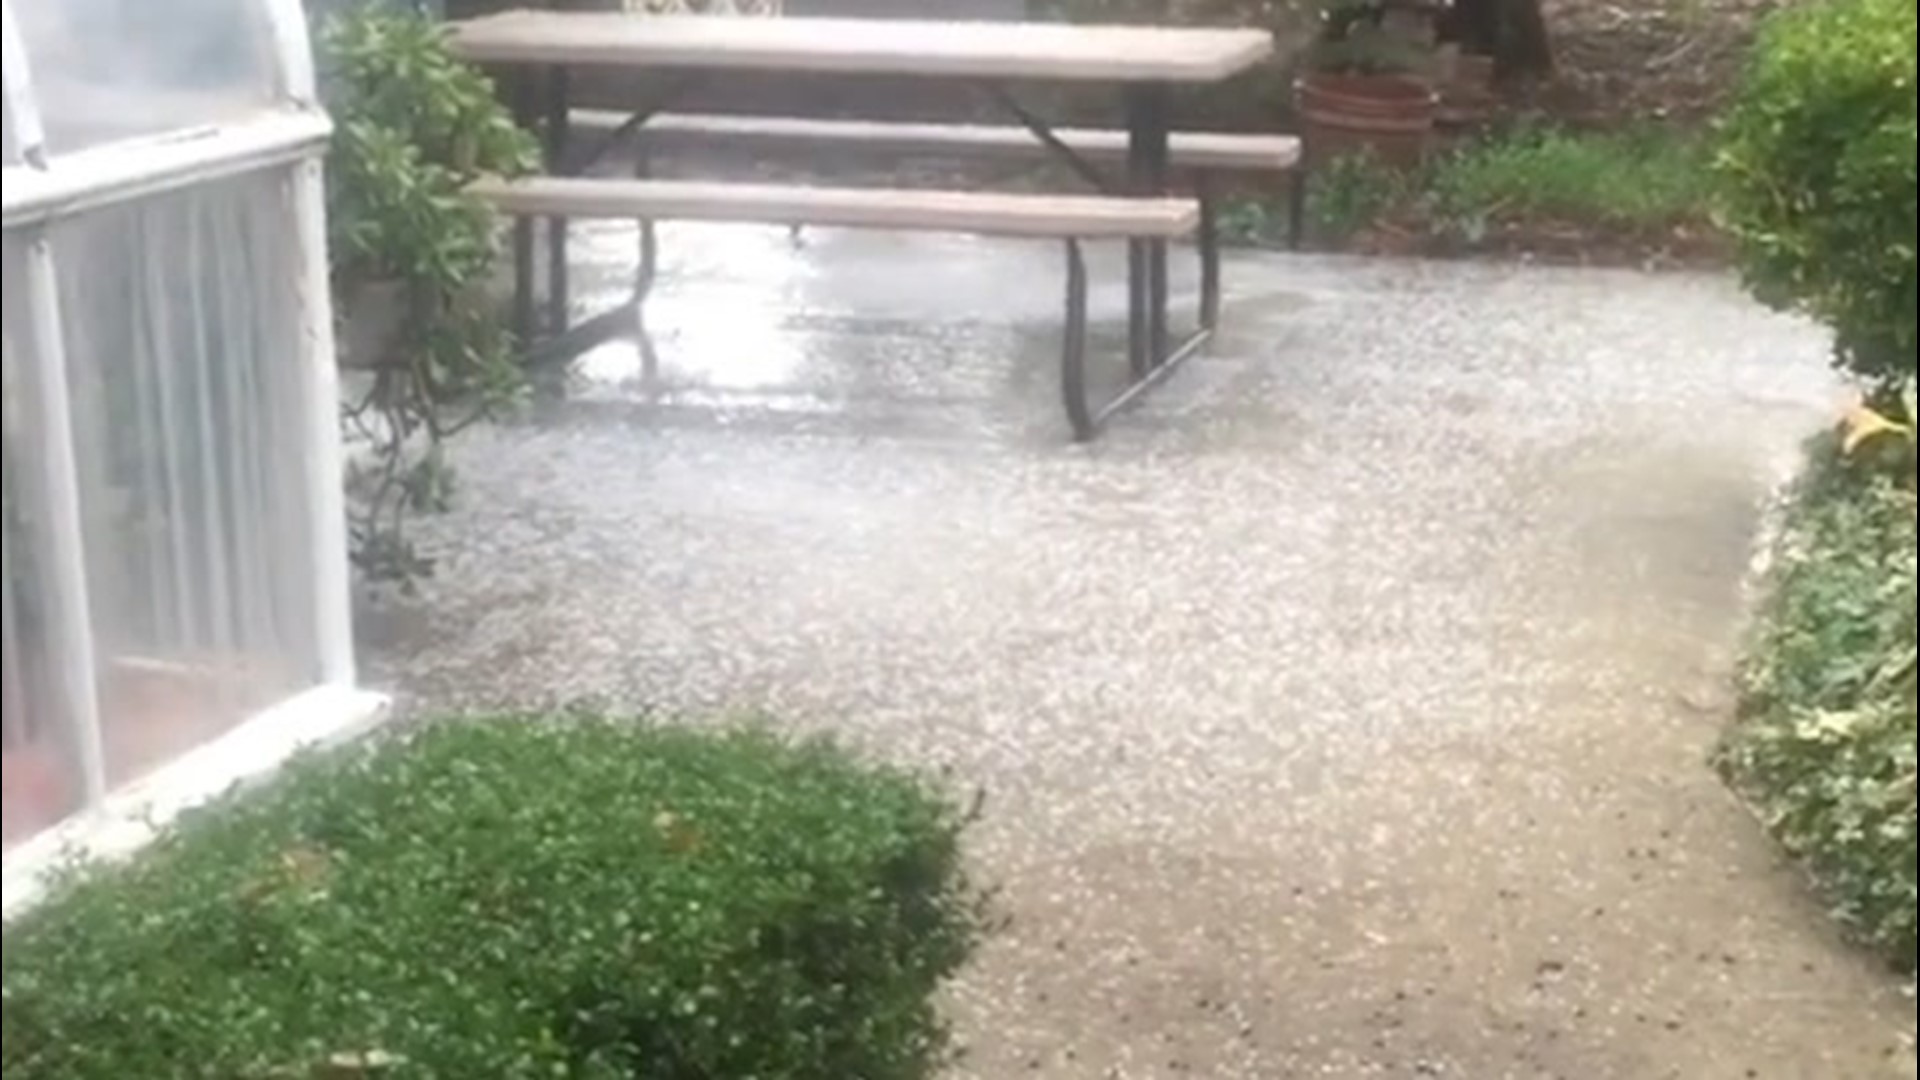 Rain and hail fell across parts of Los Angeles, California. This video shows hail northwest of the city near Oxnard on Jan. 23.